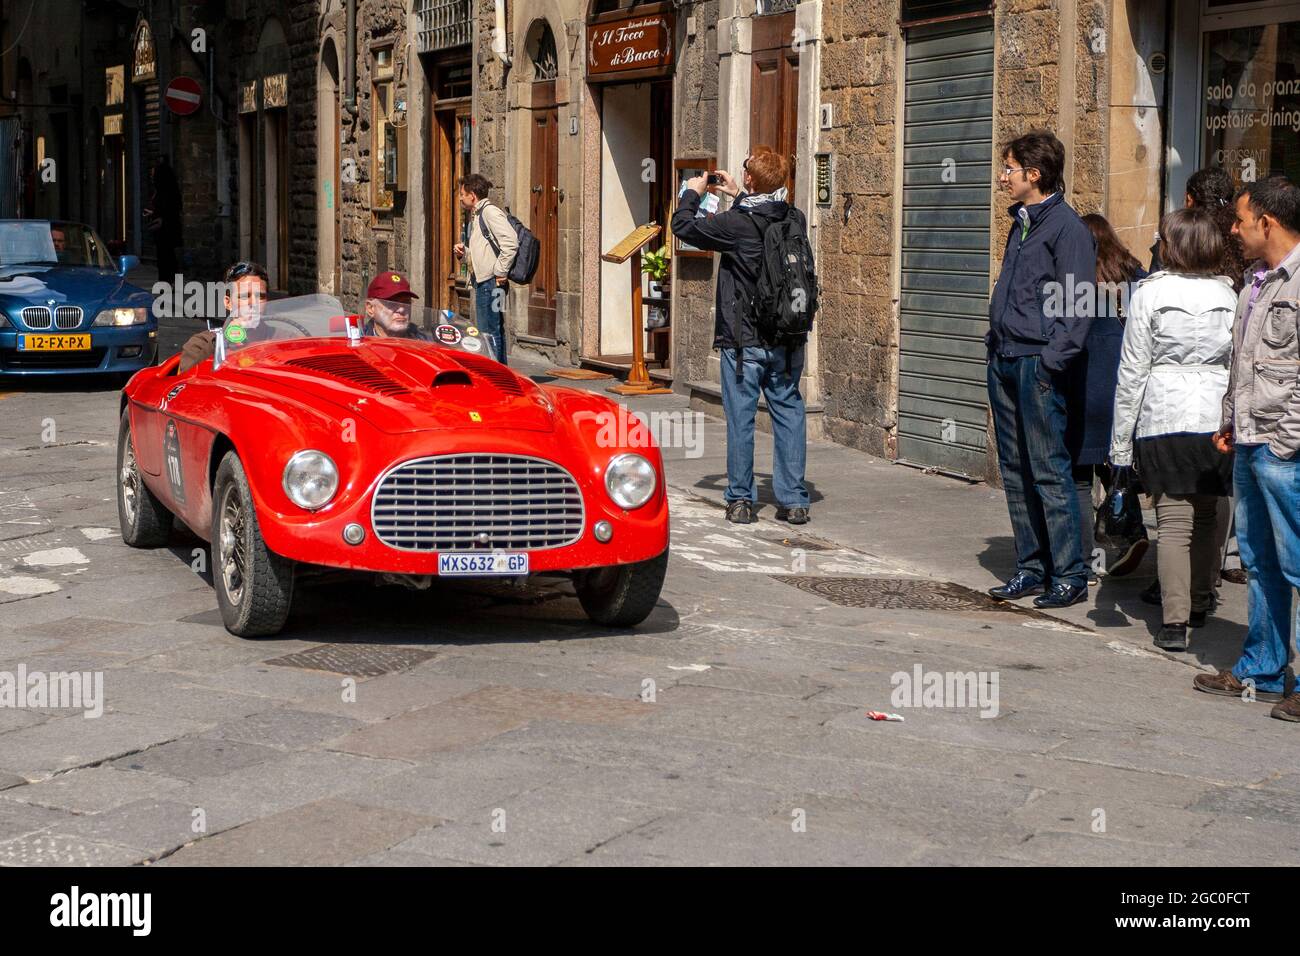 Florence, Italy - May 8, 2010: FERRARI 166 MM Touring Barchetta s/n 0056M (1950) in the rally Mille Miglia 2010 edition on a busy street in Florence. Stock Photo